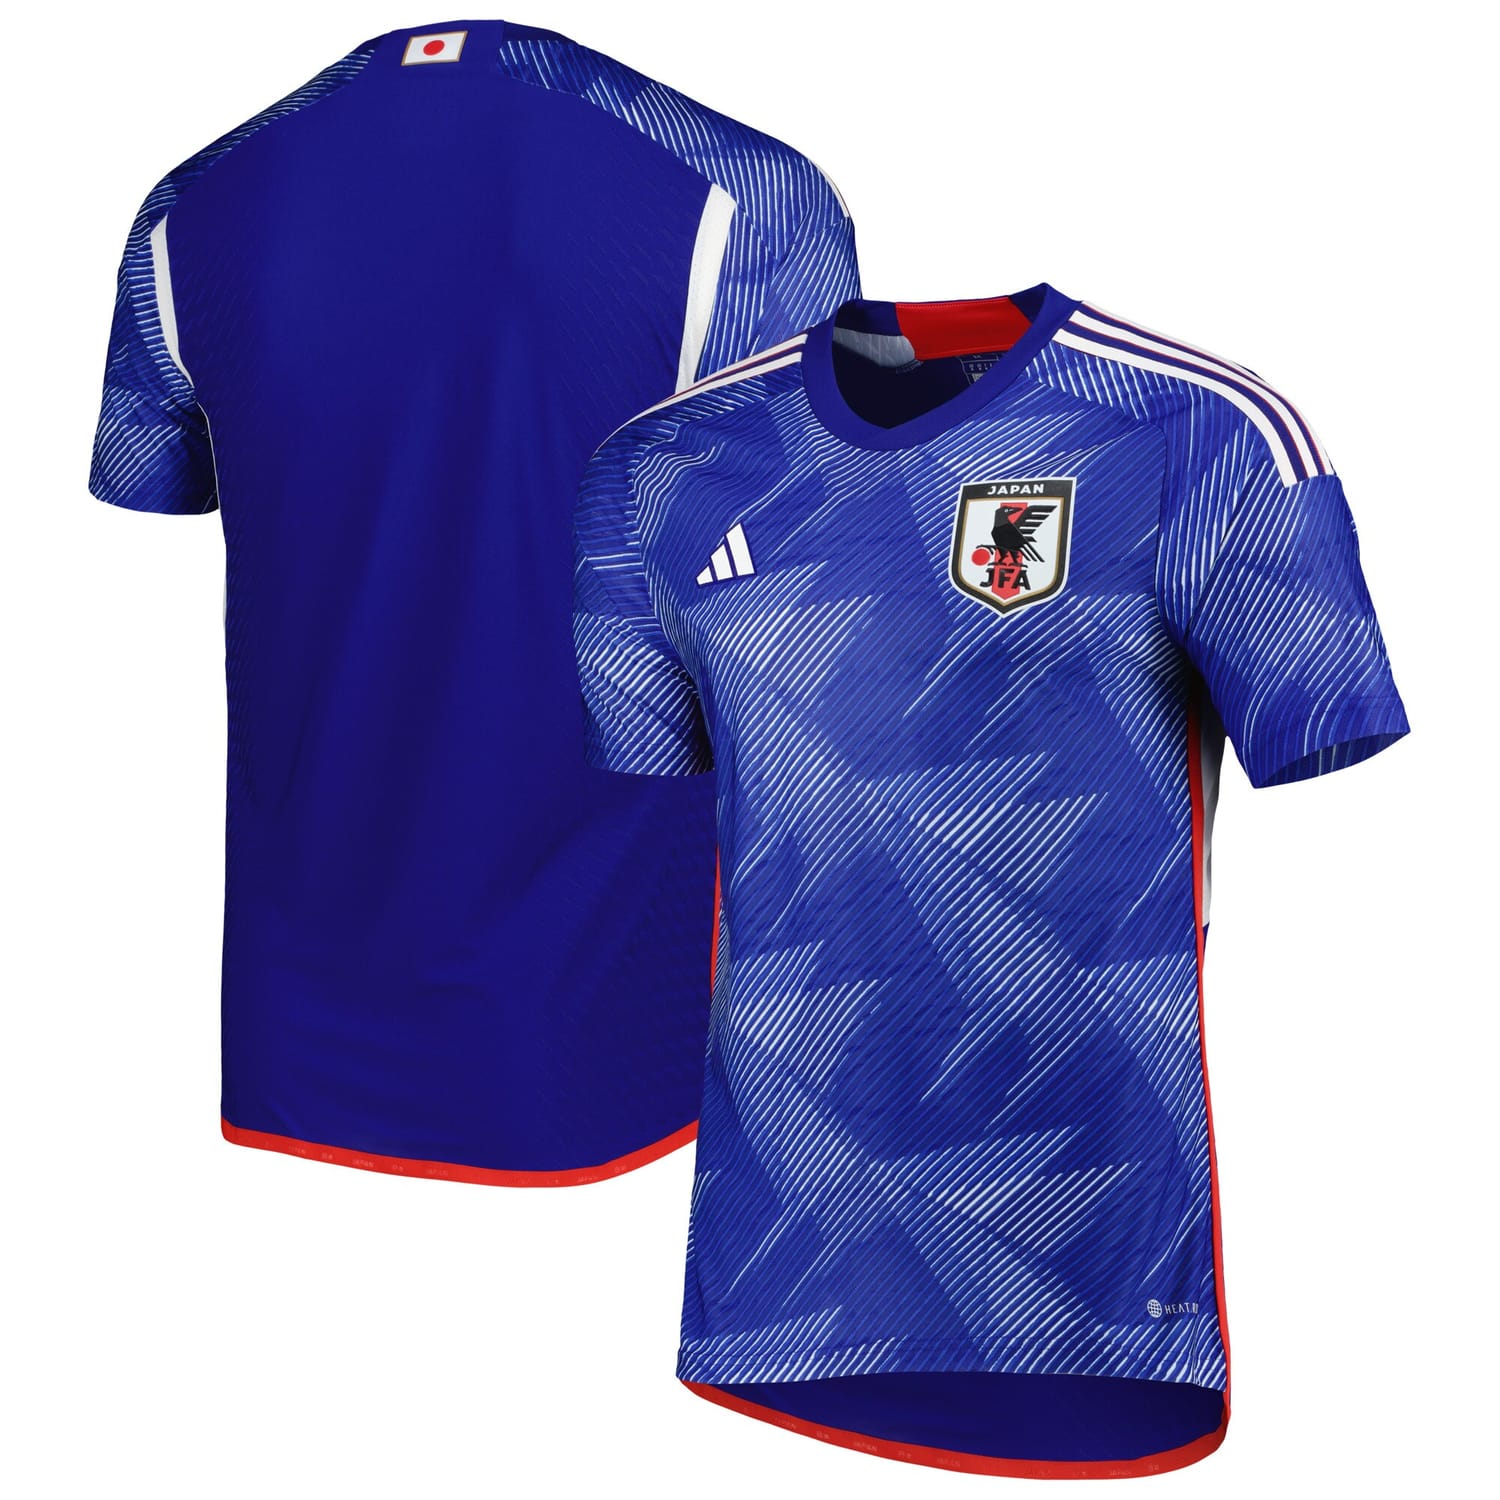 Japan National Team Home Authentic Jersey Shirt Blue 2022-23 for Men